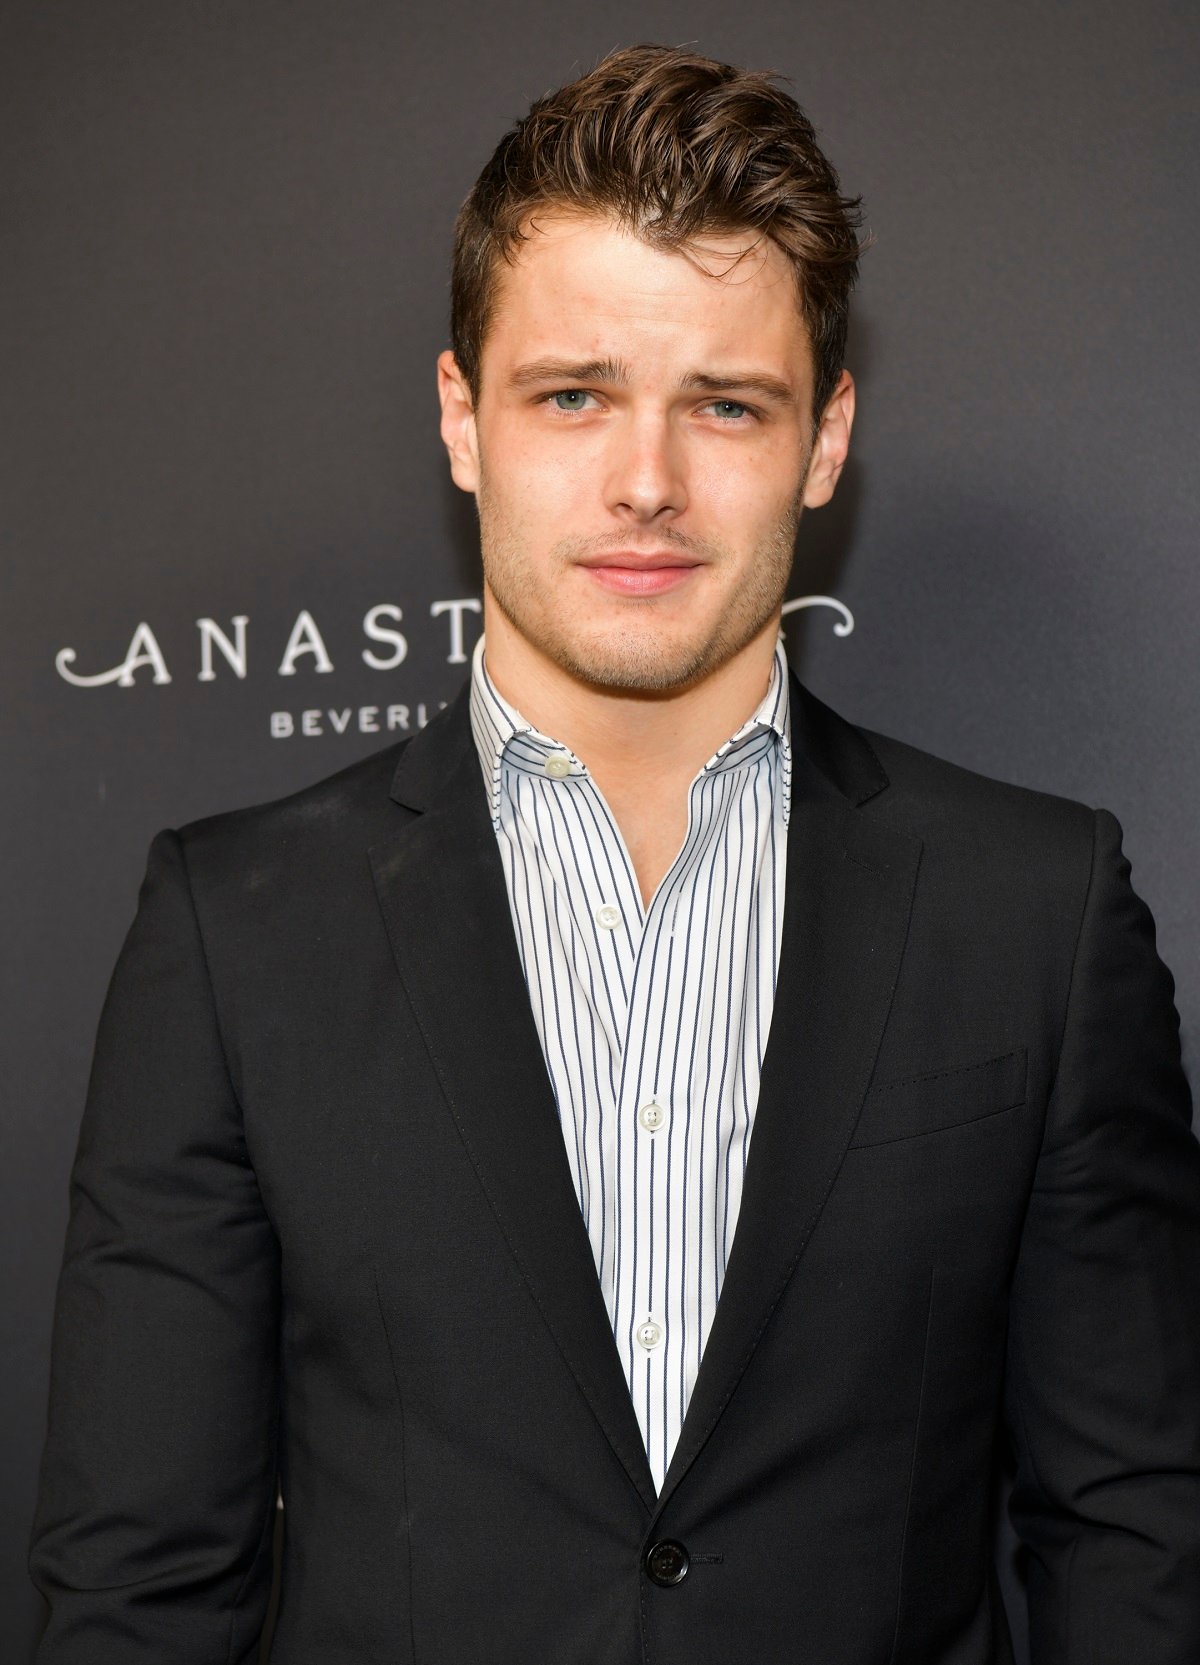 'The Young and the Restless' actor Michael Mealor wearing a black suit and blue and white striped shirt.